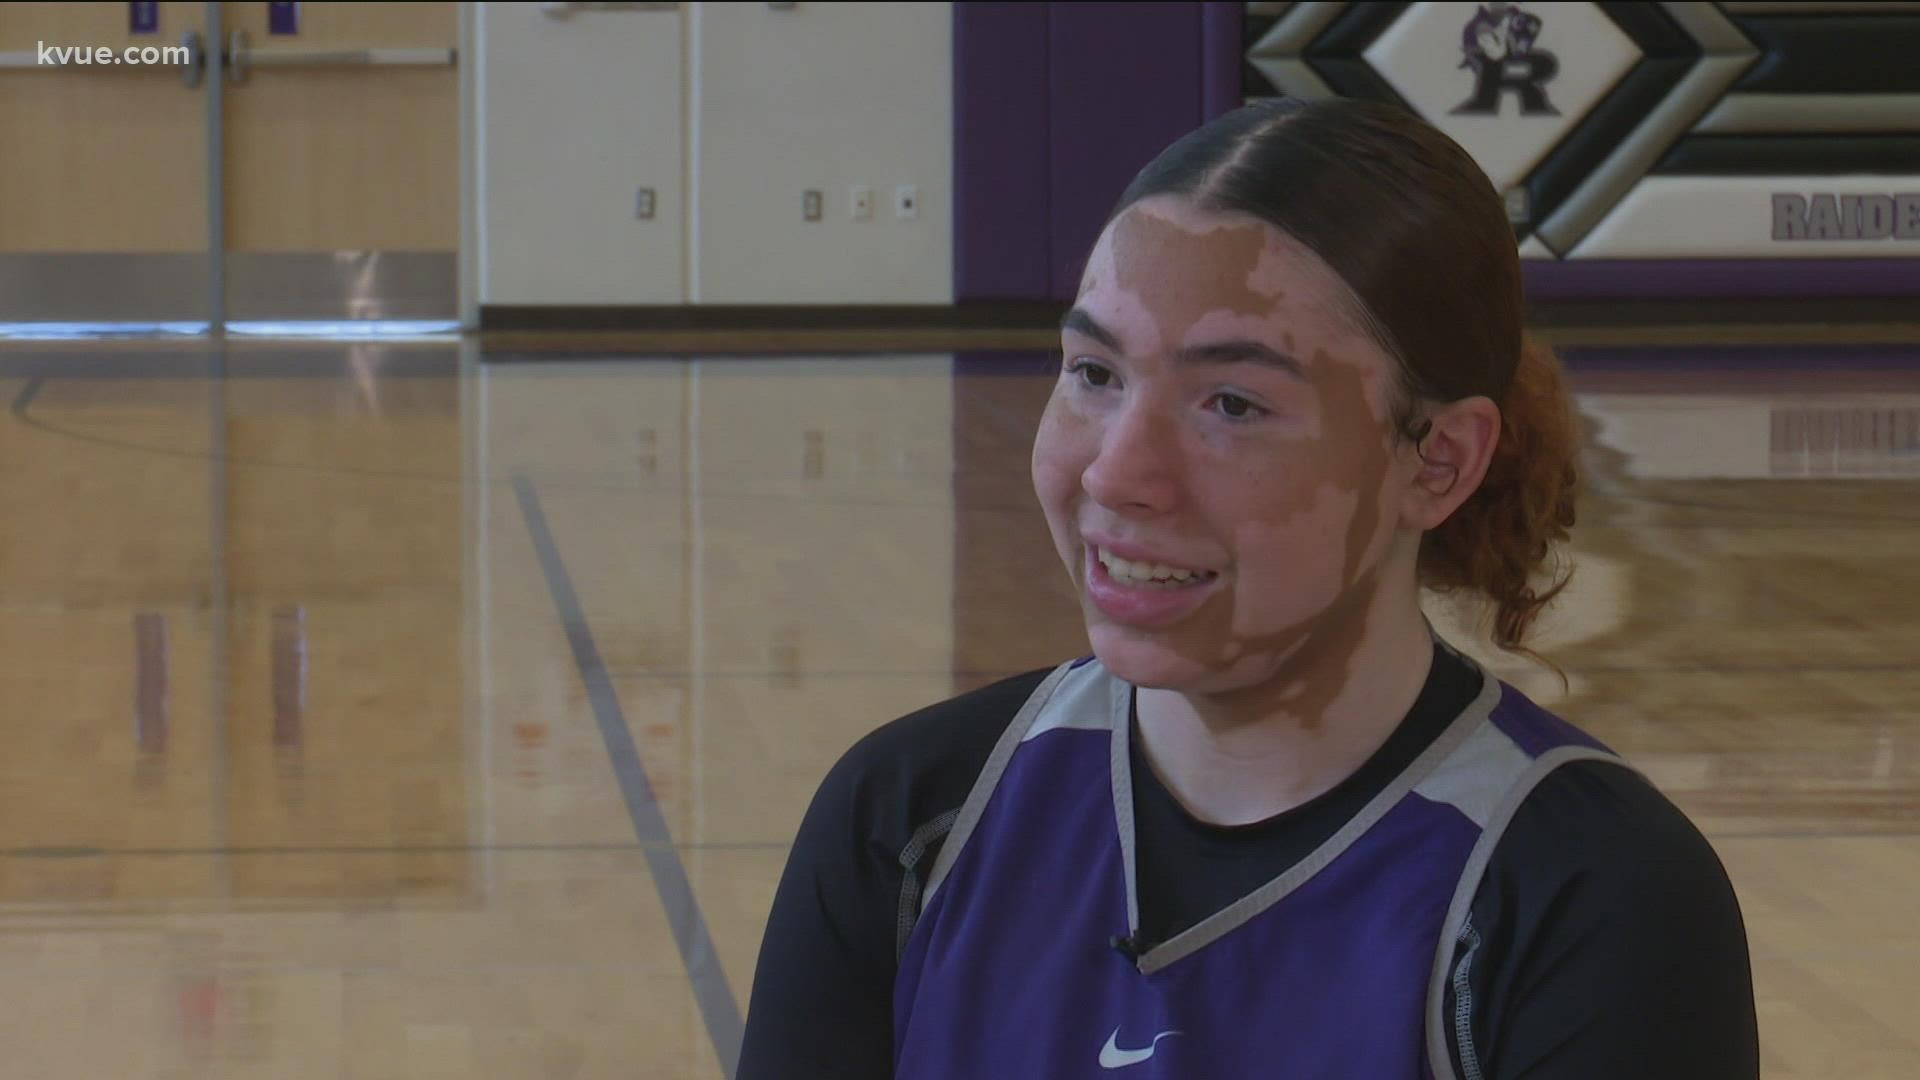 A Cedar Ridge basketball player is finding confidence on the court and in her skin. That path wasn't easy for Lexi Alexander, but basketball gave her a platform.